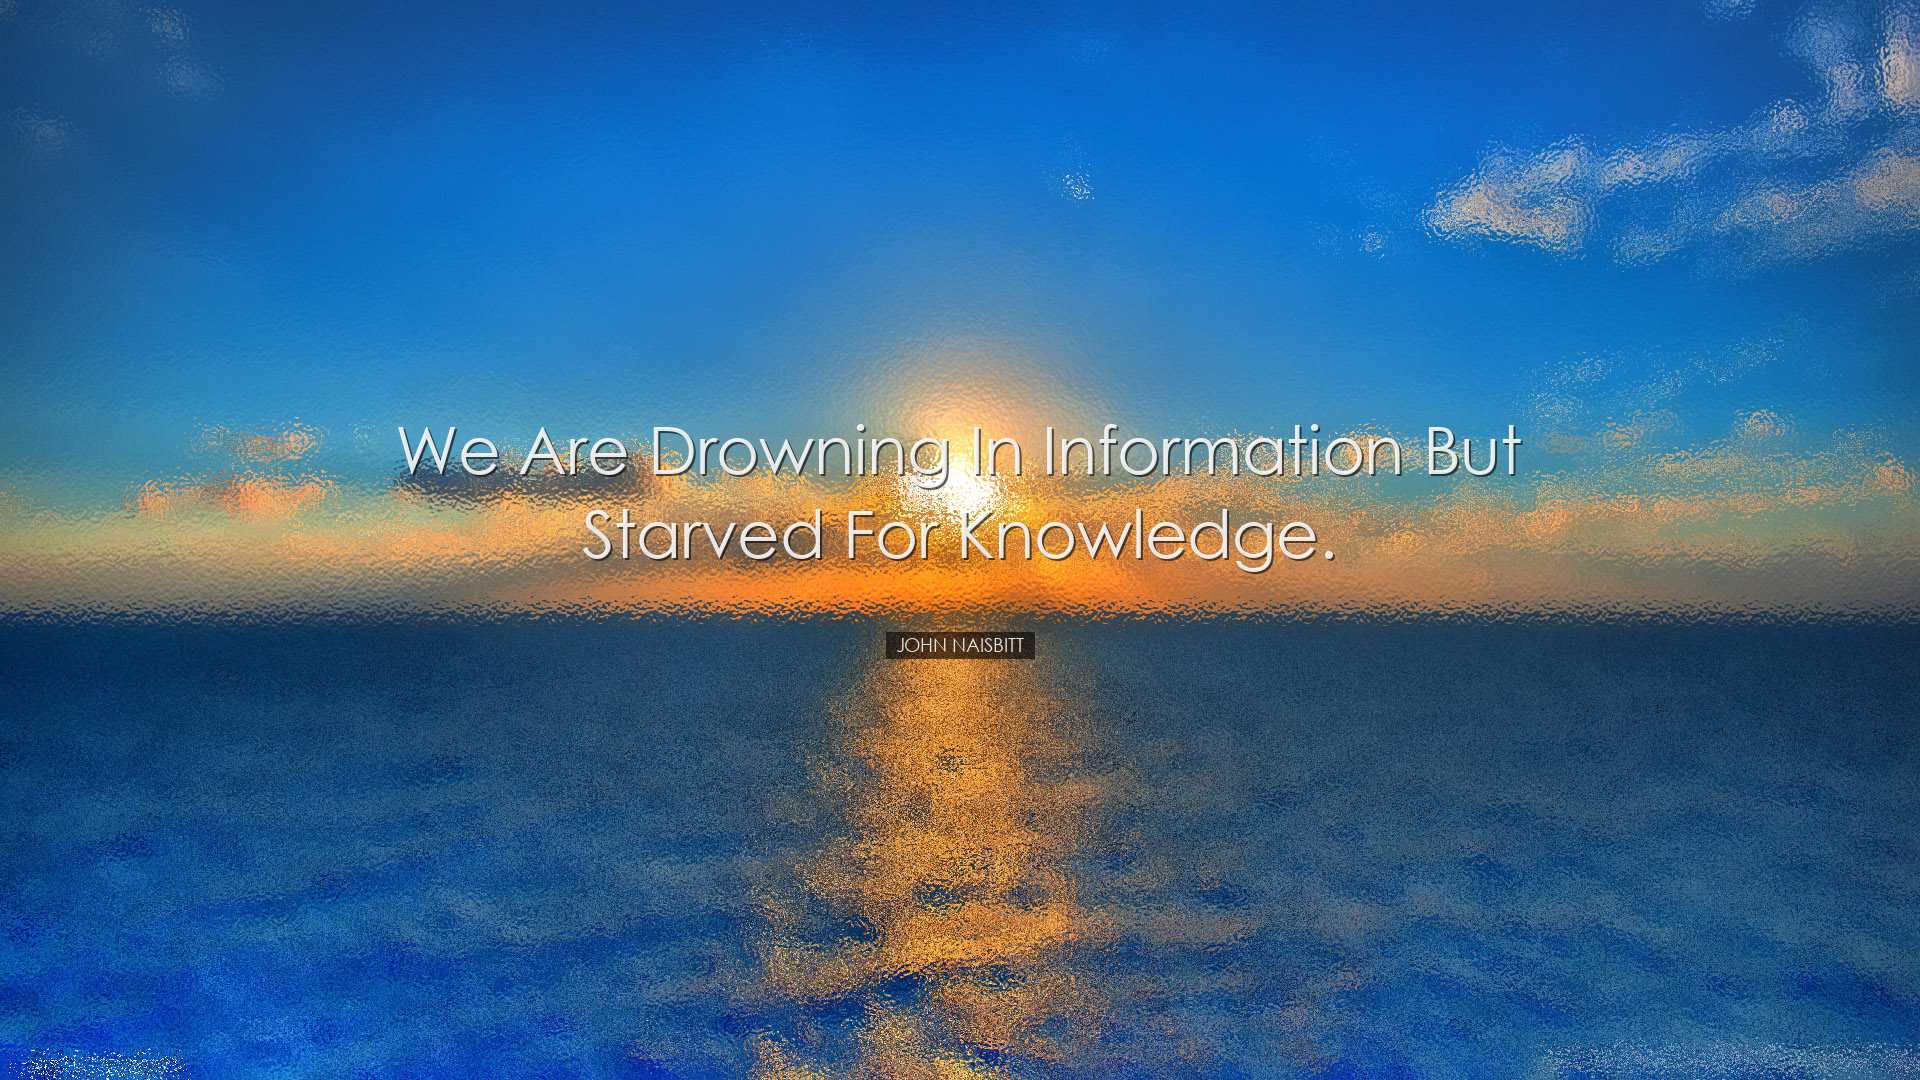 We are drowning in information but starved for knowledge. - John N